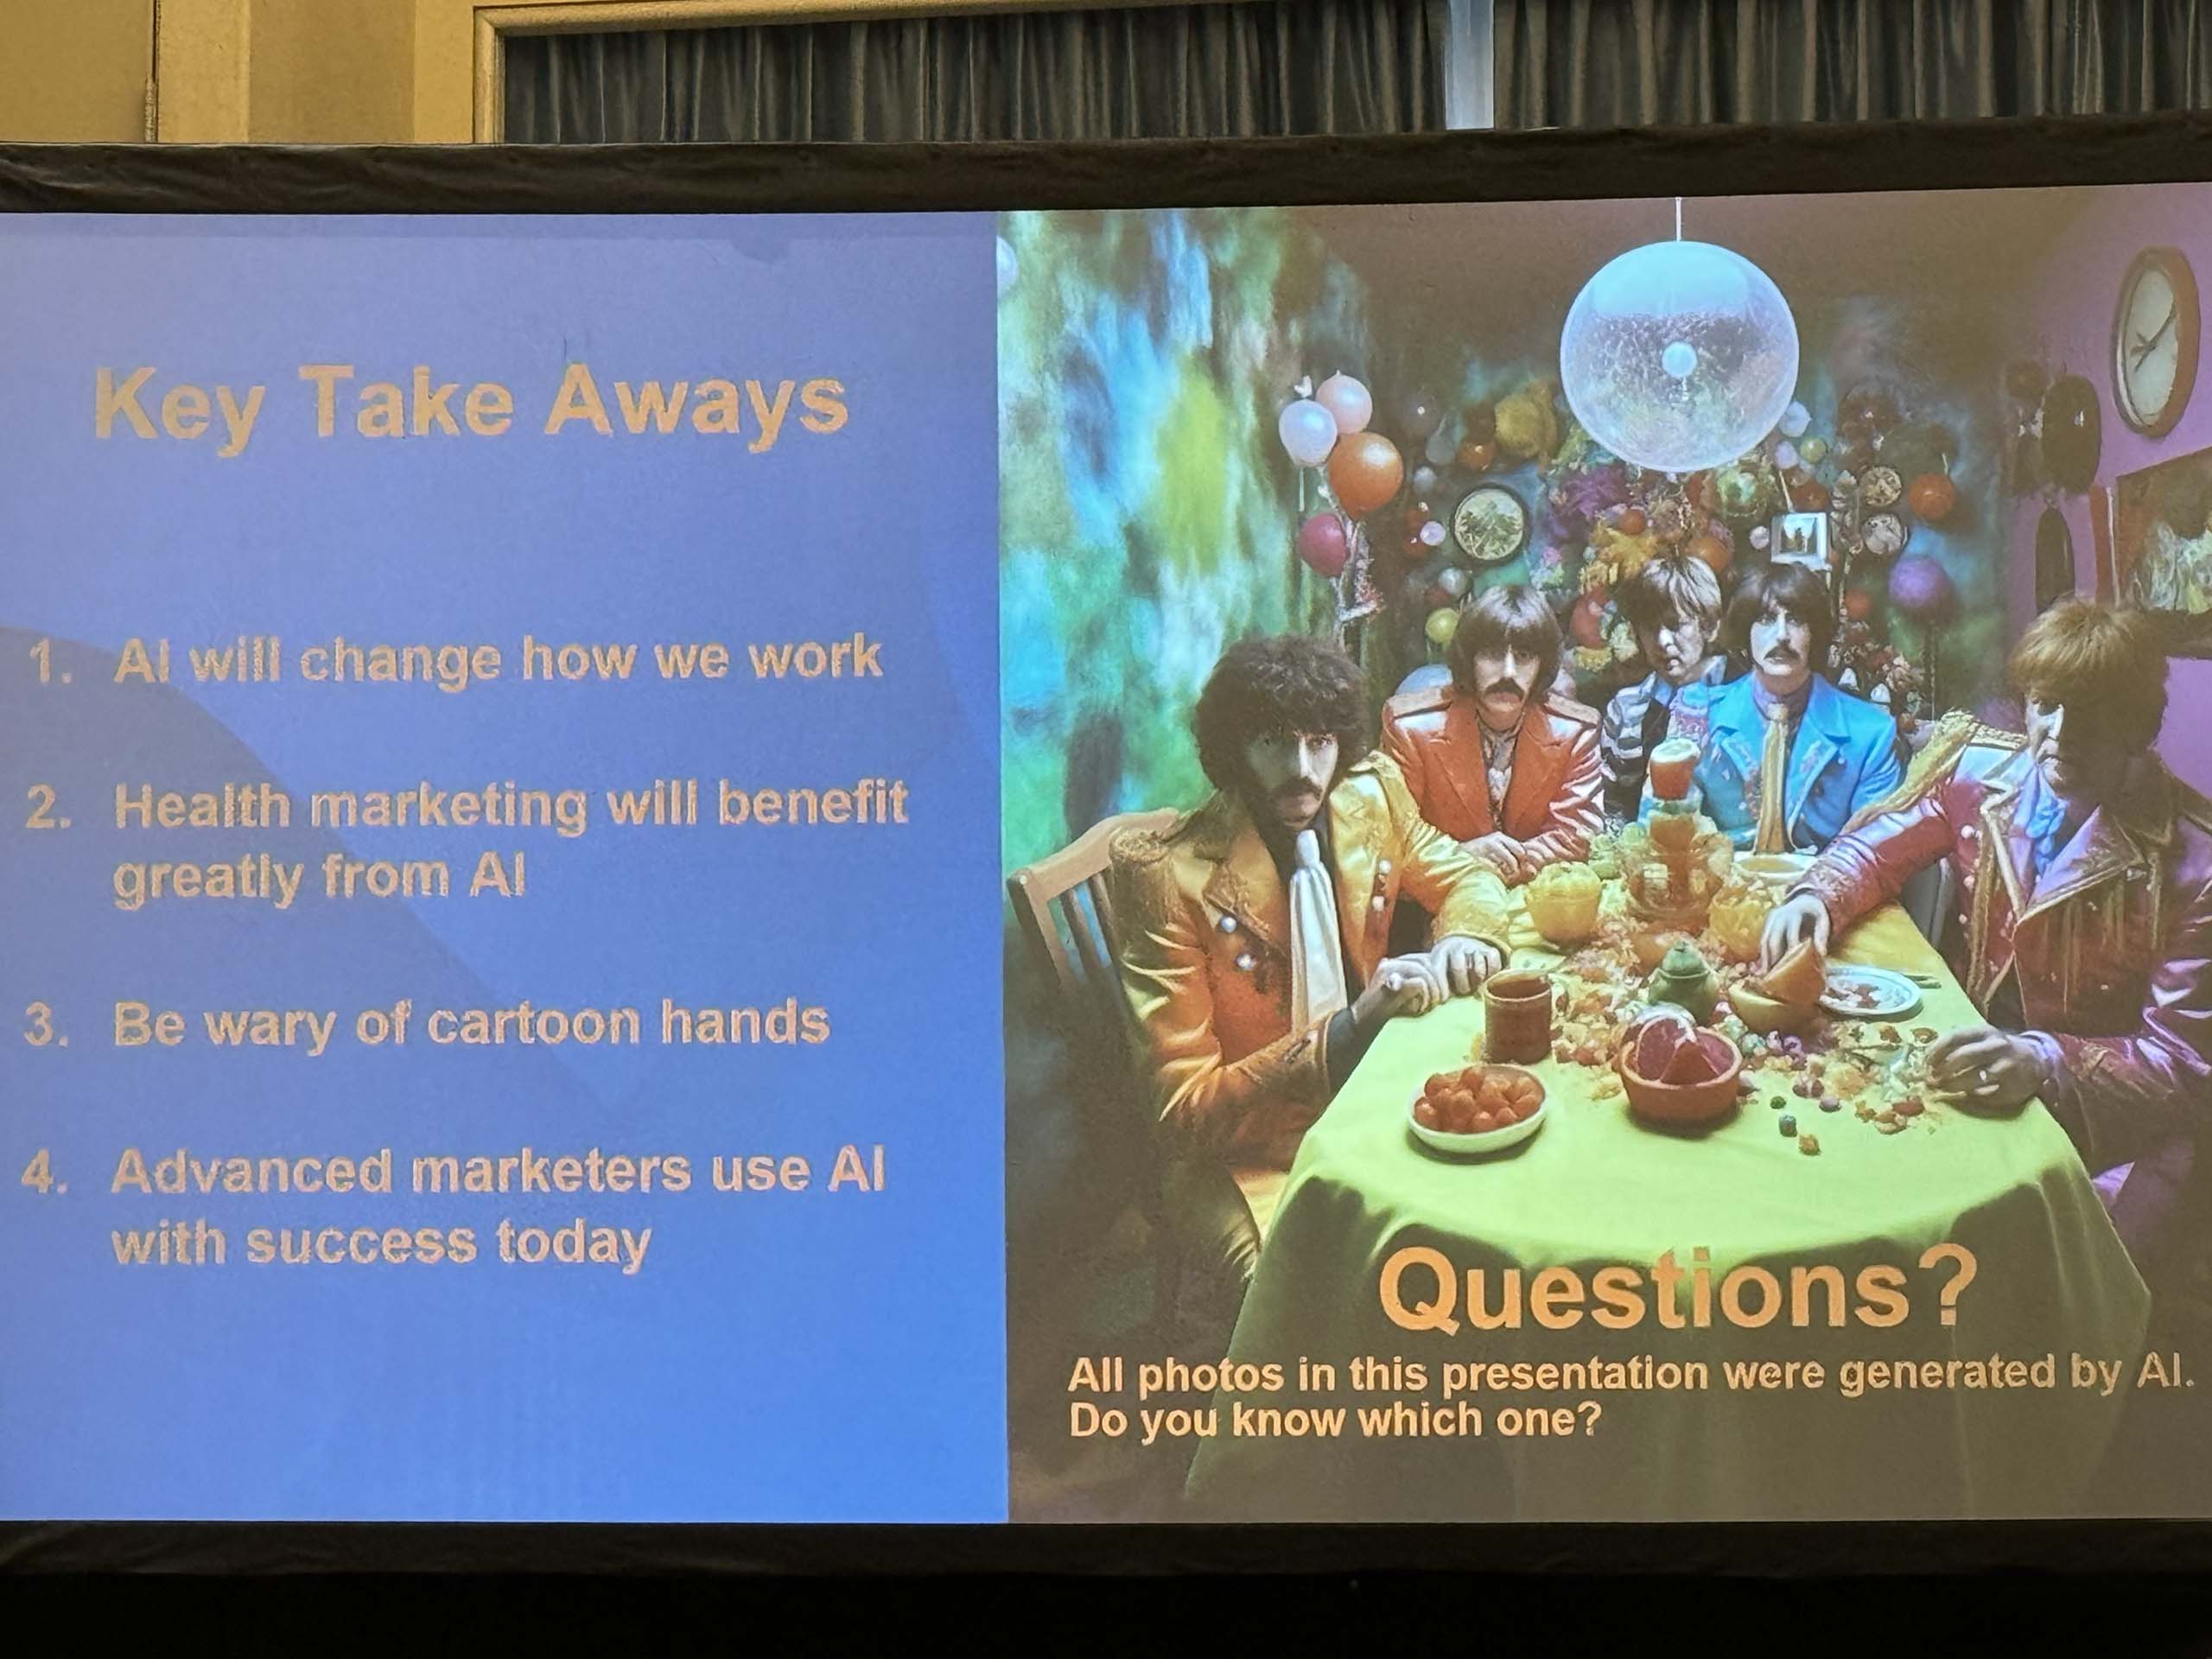 A presentation slide covering key take aways with an AI generated image of The Beatles.